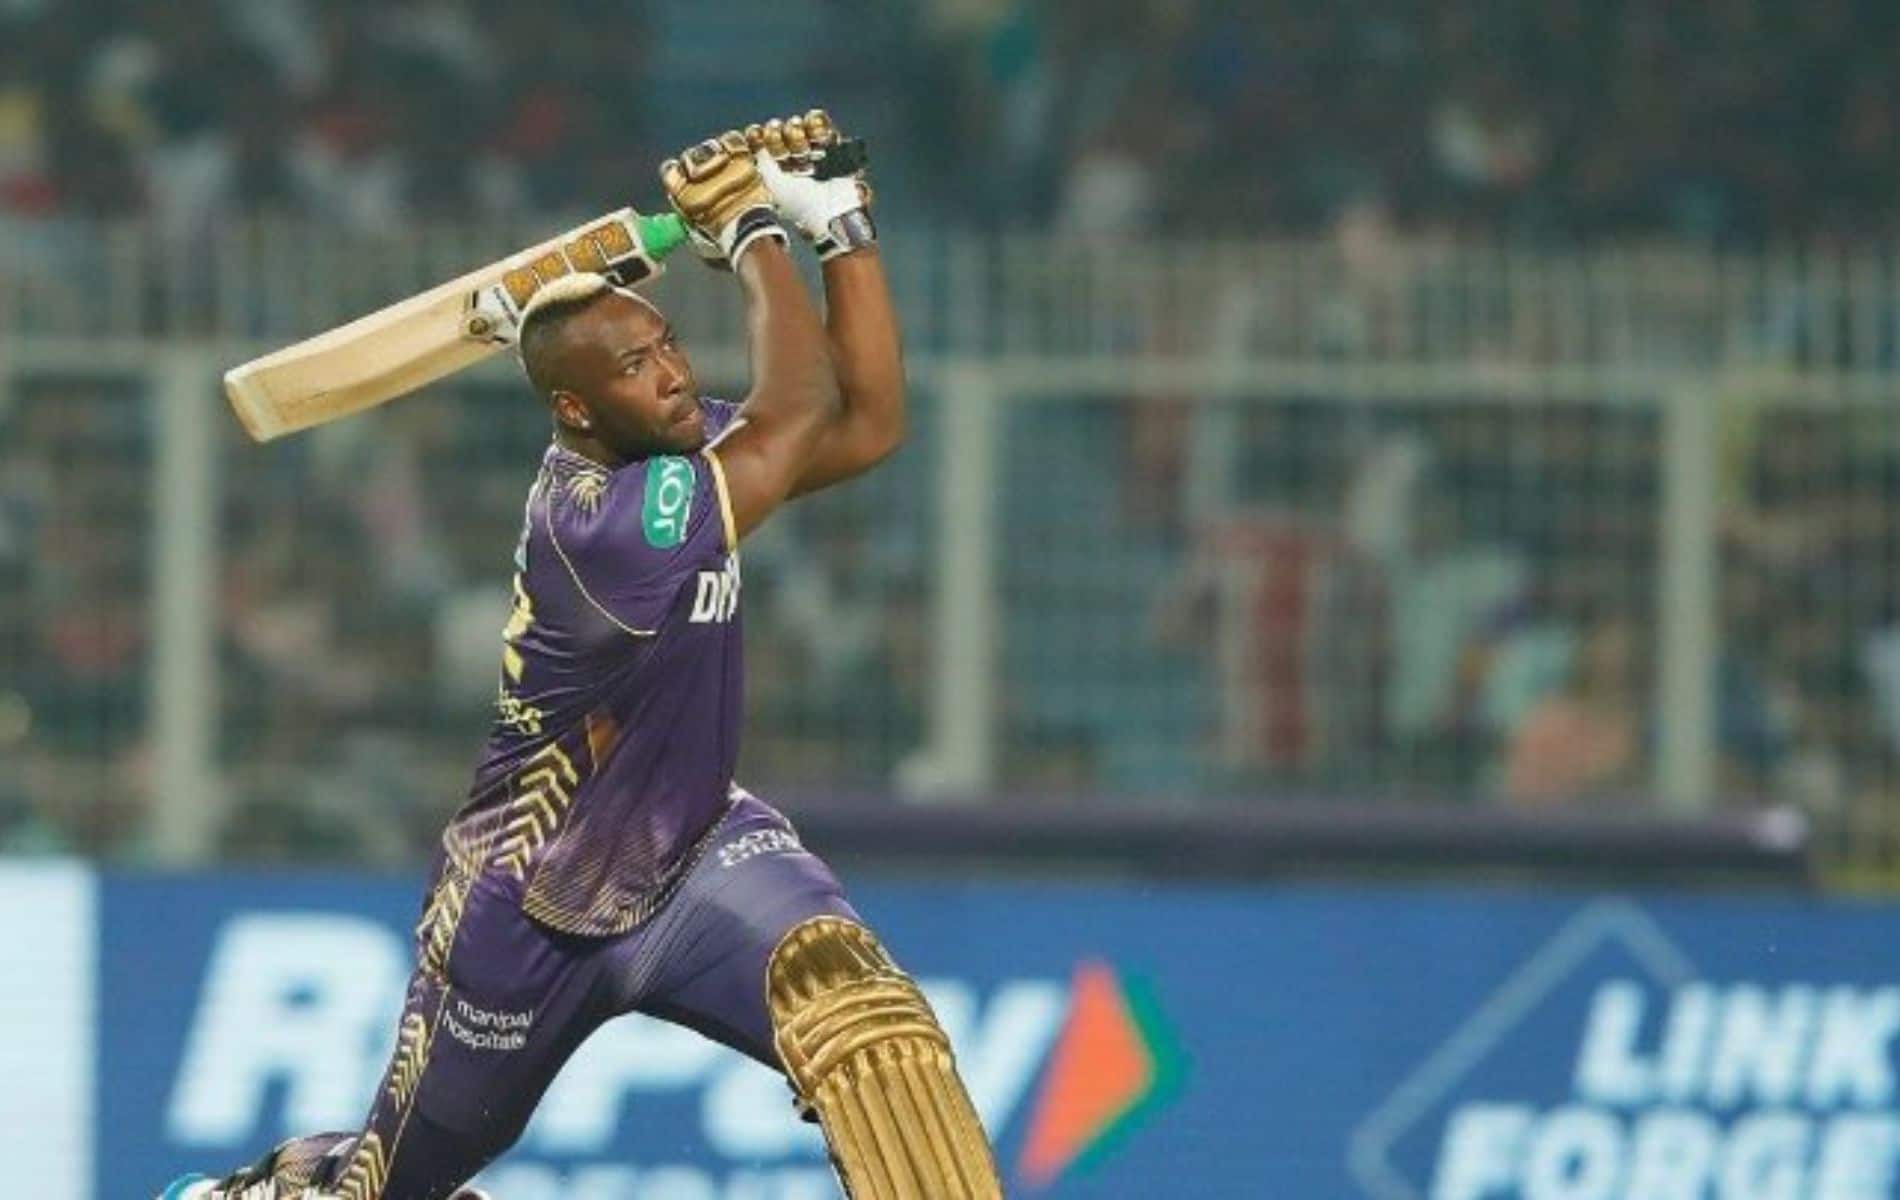 Russel hit 200 sixes for KKR (X)